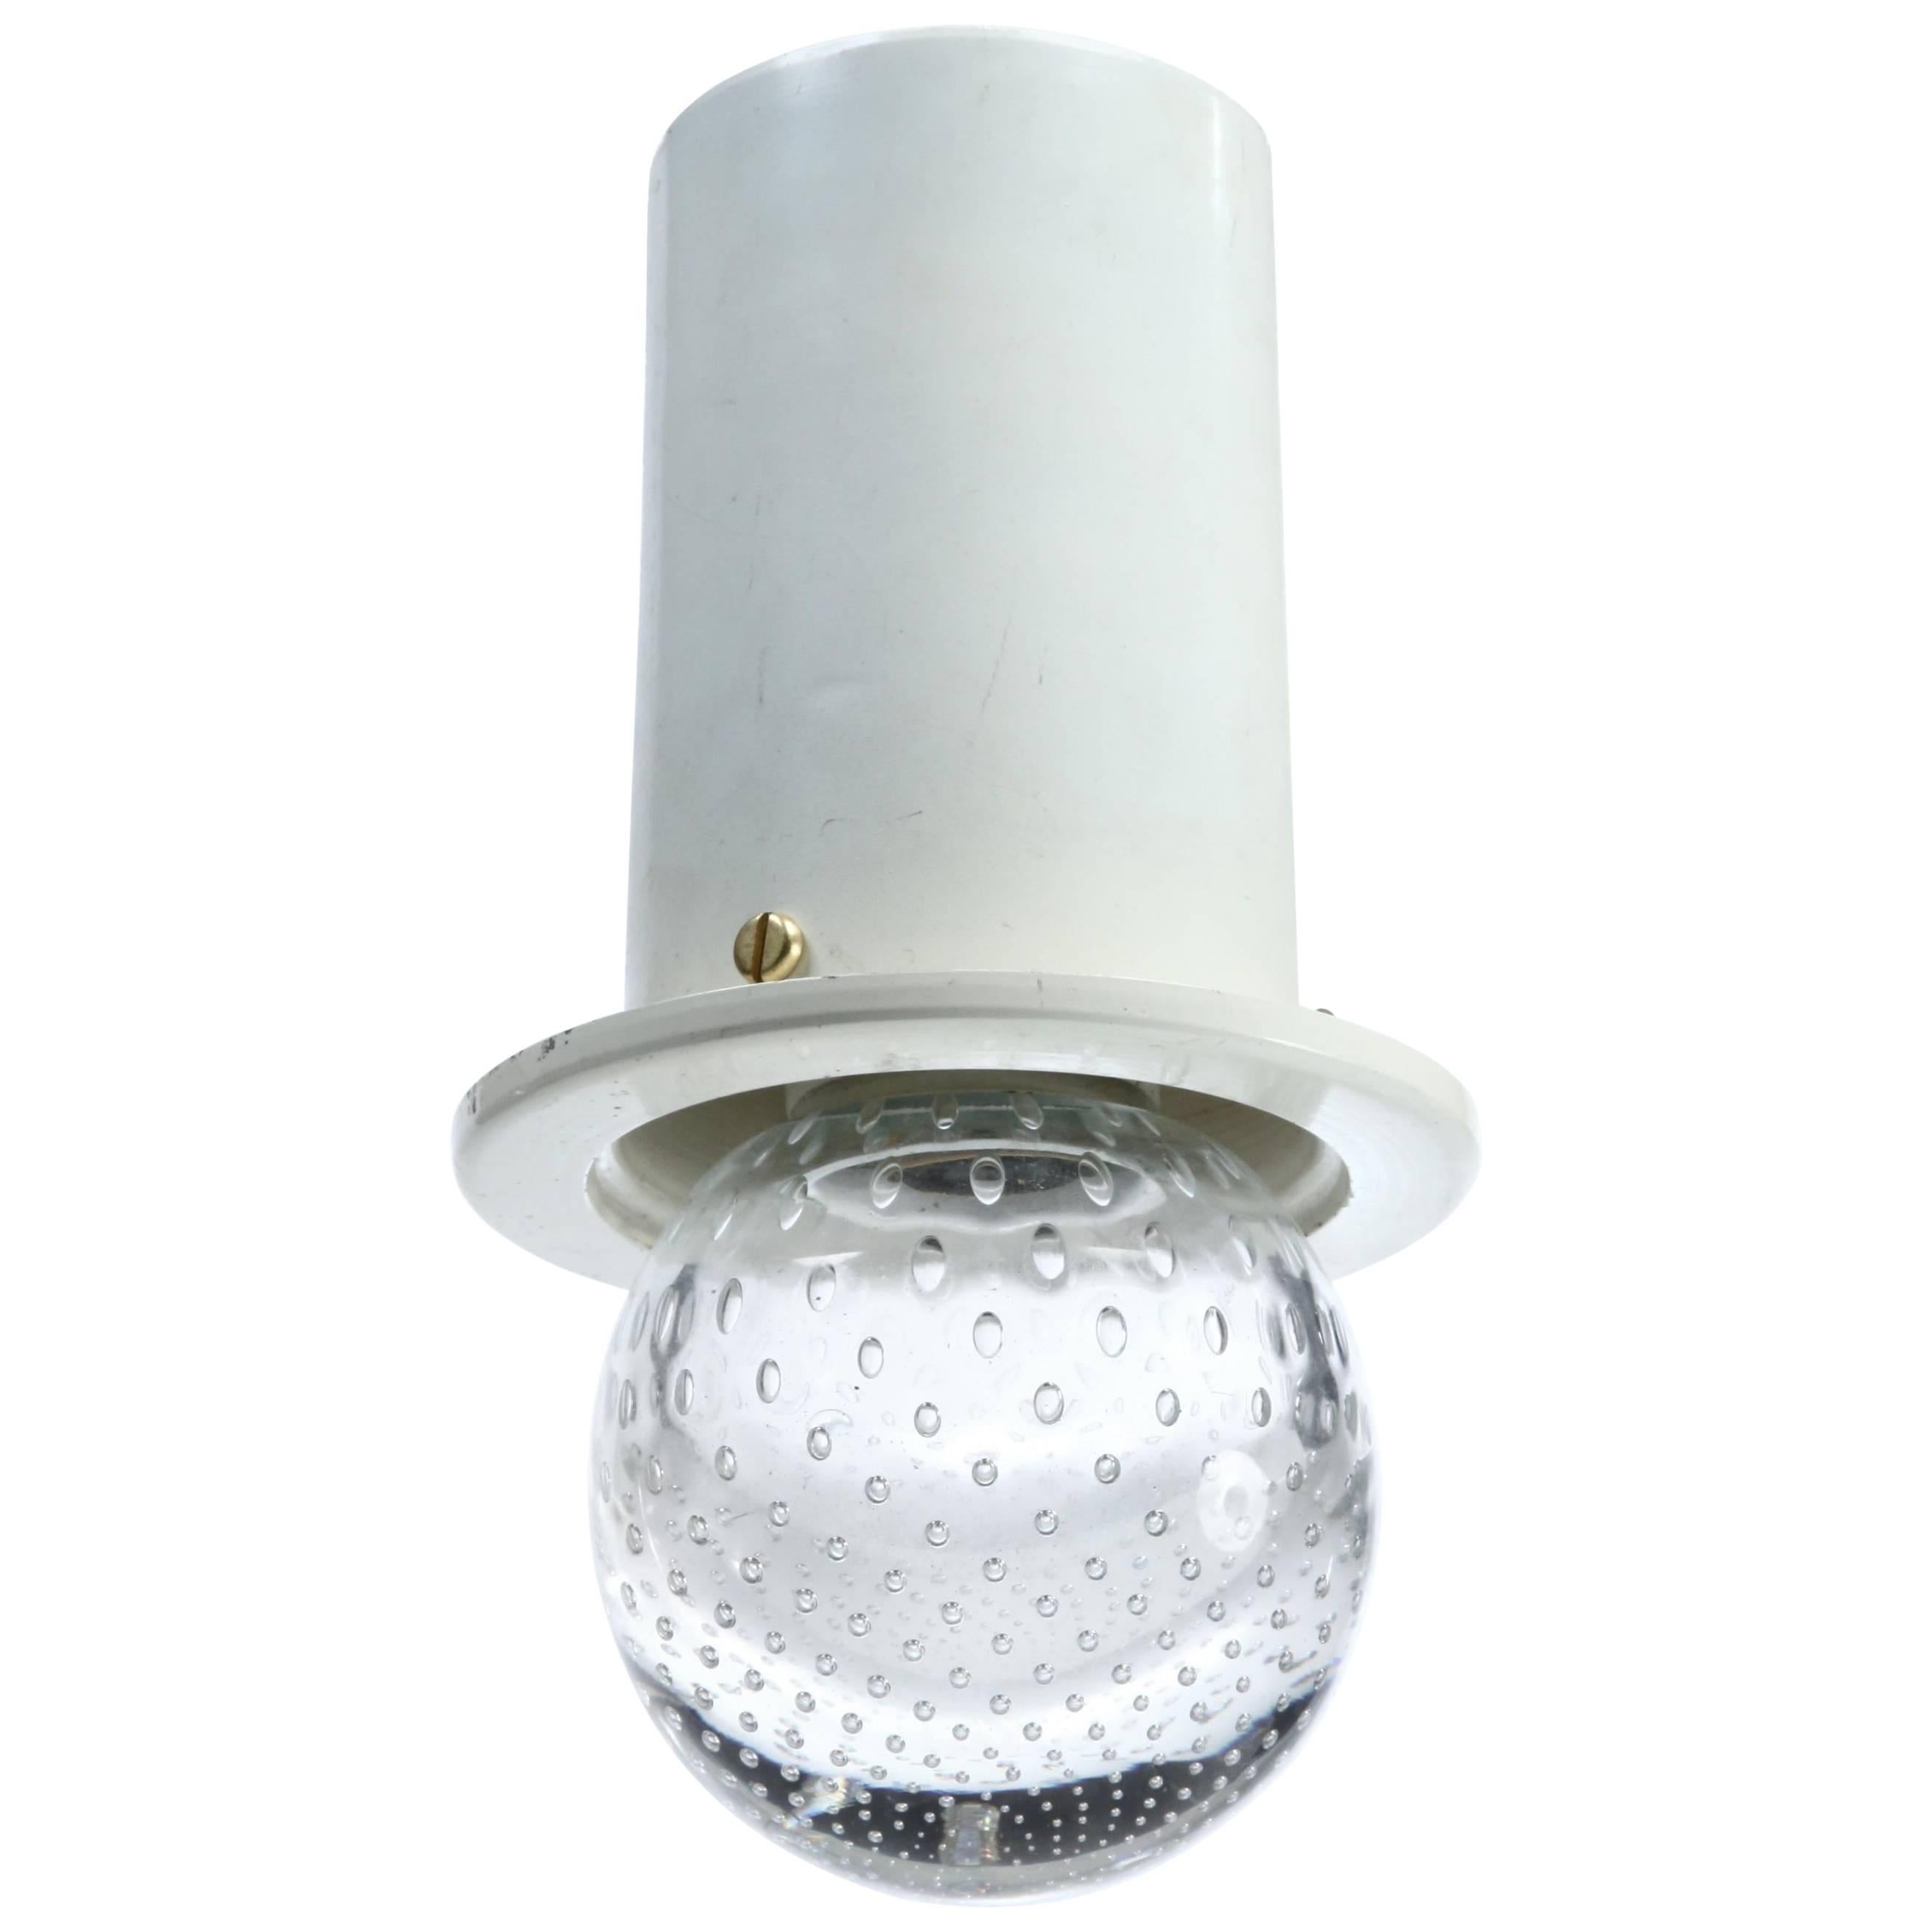 Sphere Ceiling Light by Gino Sarfatti for Arteluce